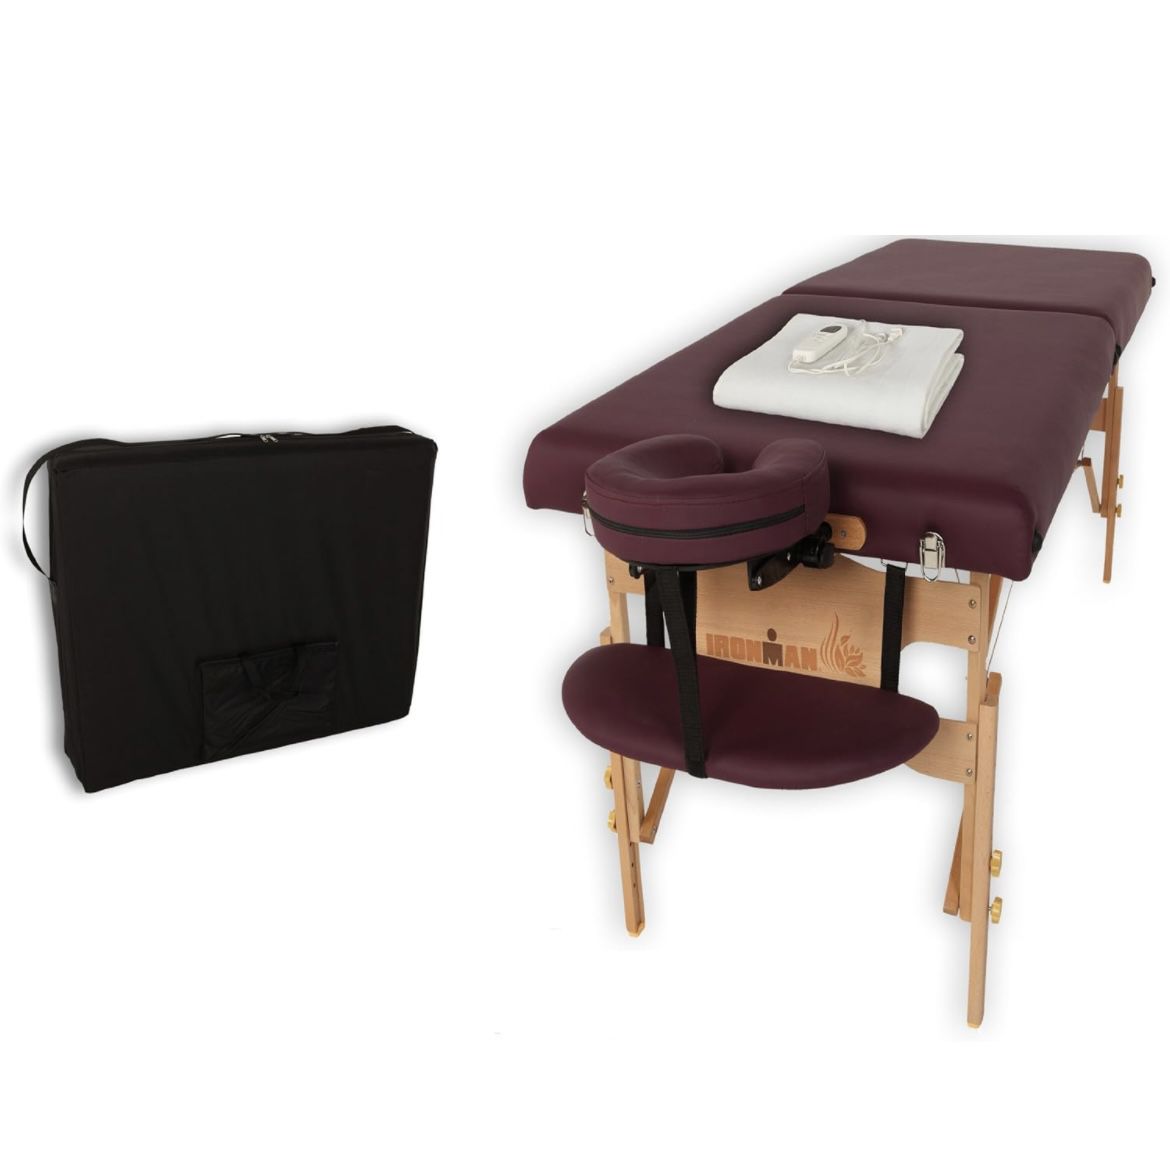 Massage Table with Heating Pad & Carry Bag